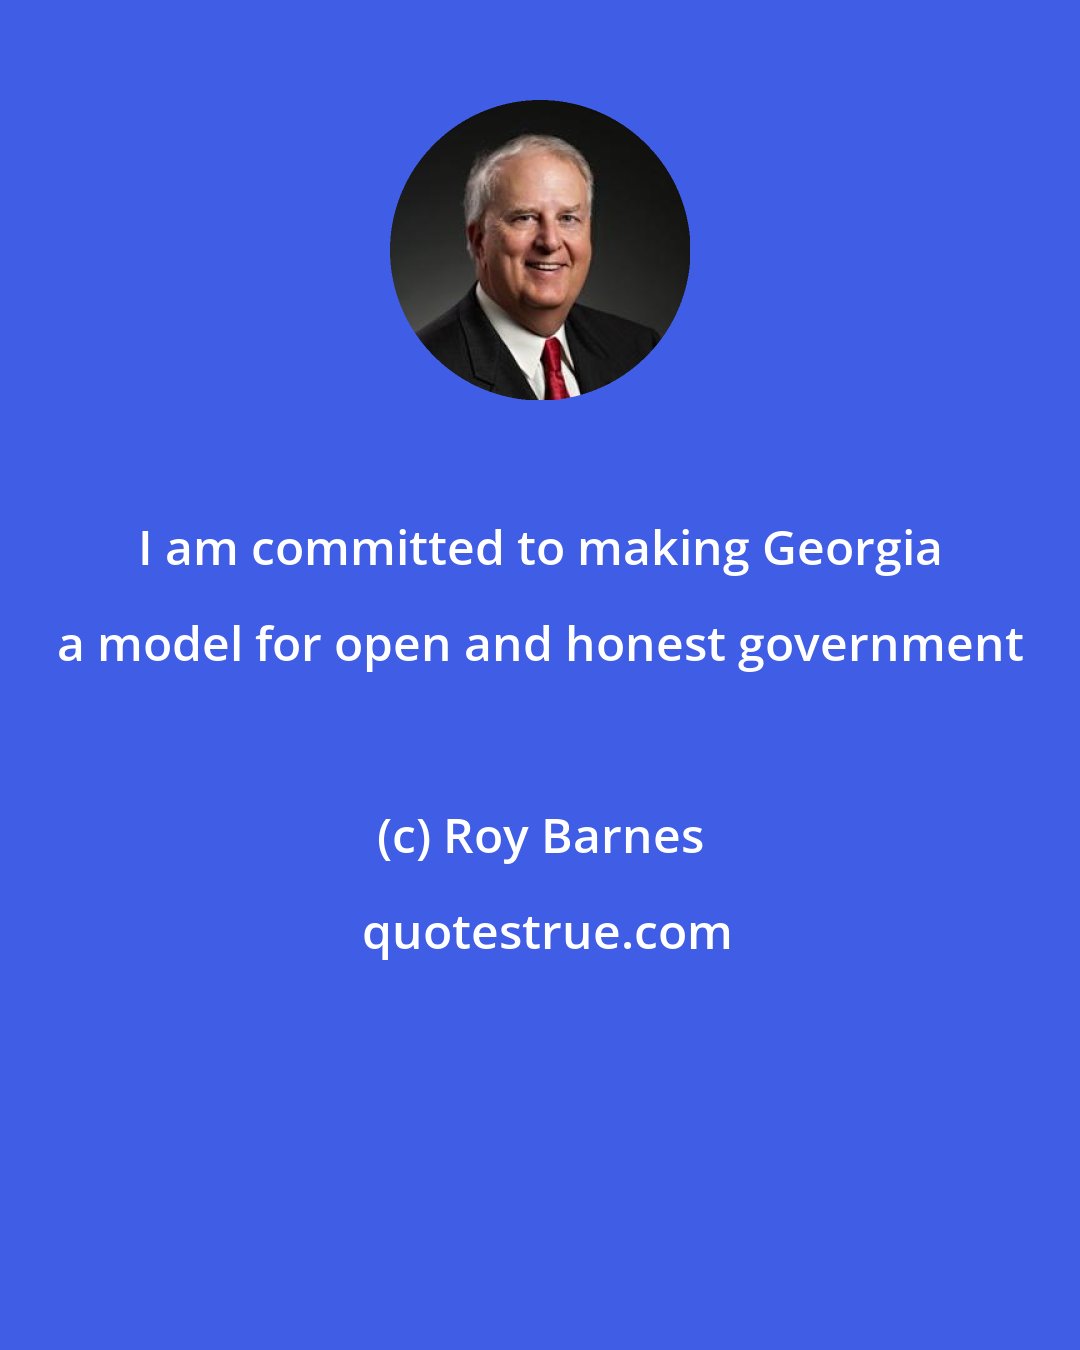 Roy Barnes: I am committed to making Georgia a model for open and honest government